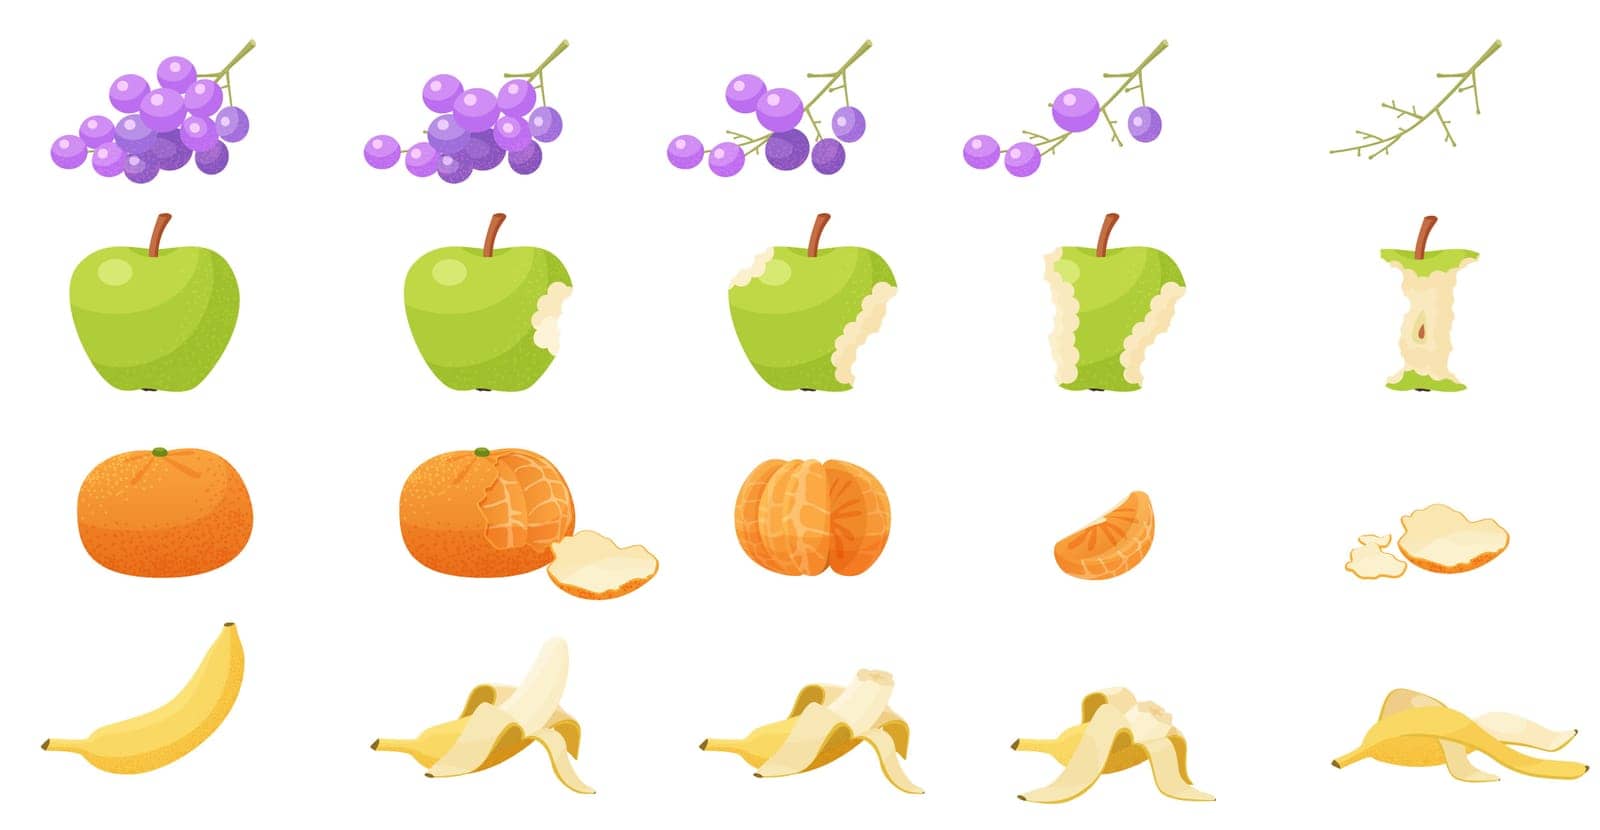 Animated steps of eating banana with peel from whole to disappear, red apple and grapes on branch, tangerine flat vector illustration. Eaten fruits set, sequence game animation of bitten food.